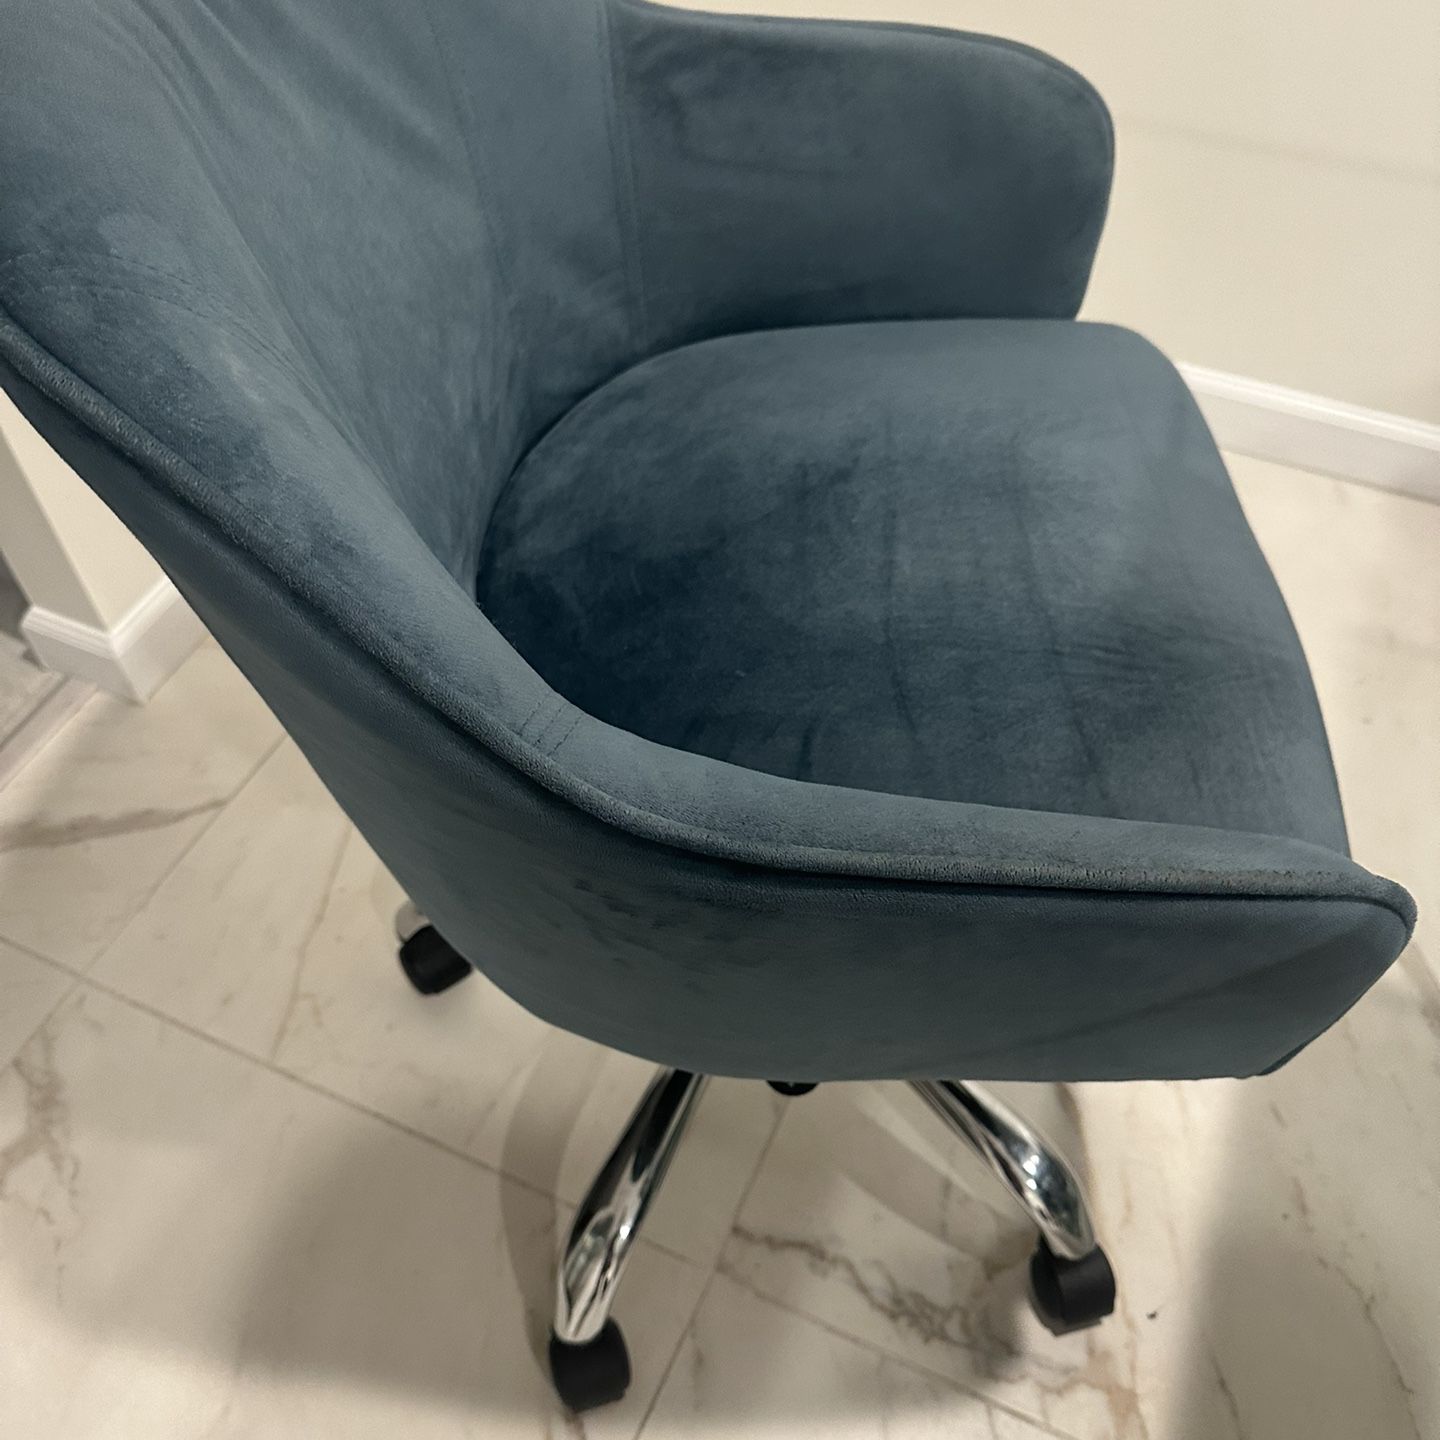 BEST OFFER - Office / Conference Room Chairs